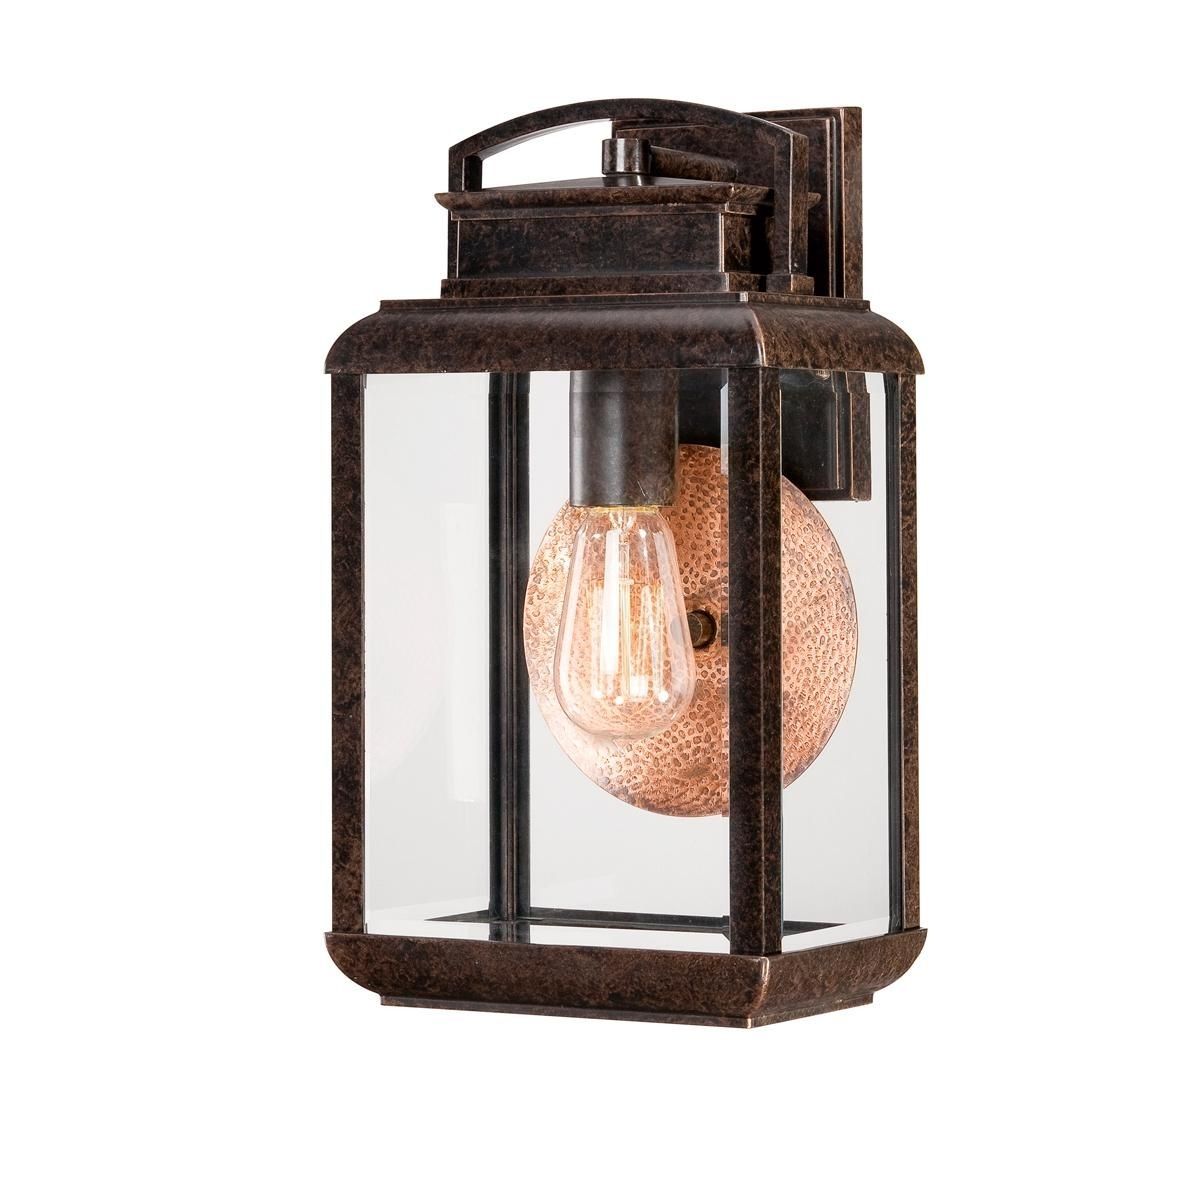 Small Modern Colonial Outdoor Wall Light | For The Home | Pinterest For Quality Outdoor Wall Lighting (Photo 13 of 15)